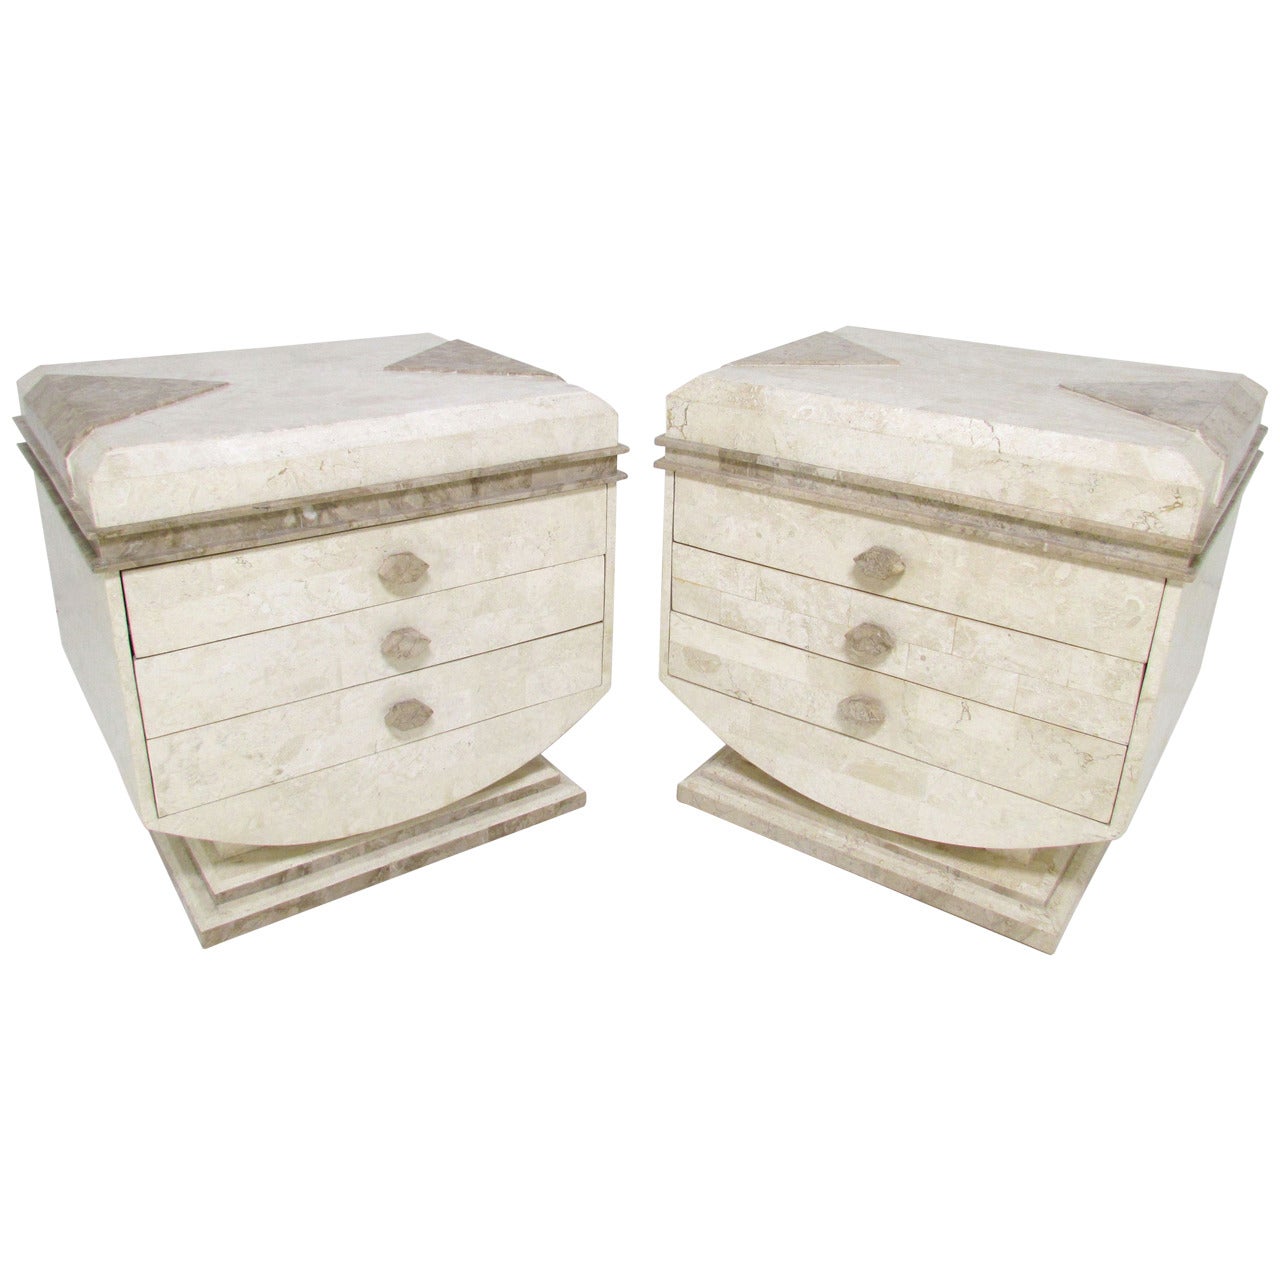 Robert Marcius for Casa Bique Tessellated Fossil Stone End Tables or Nightstands